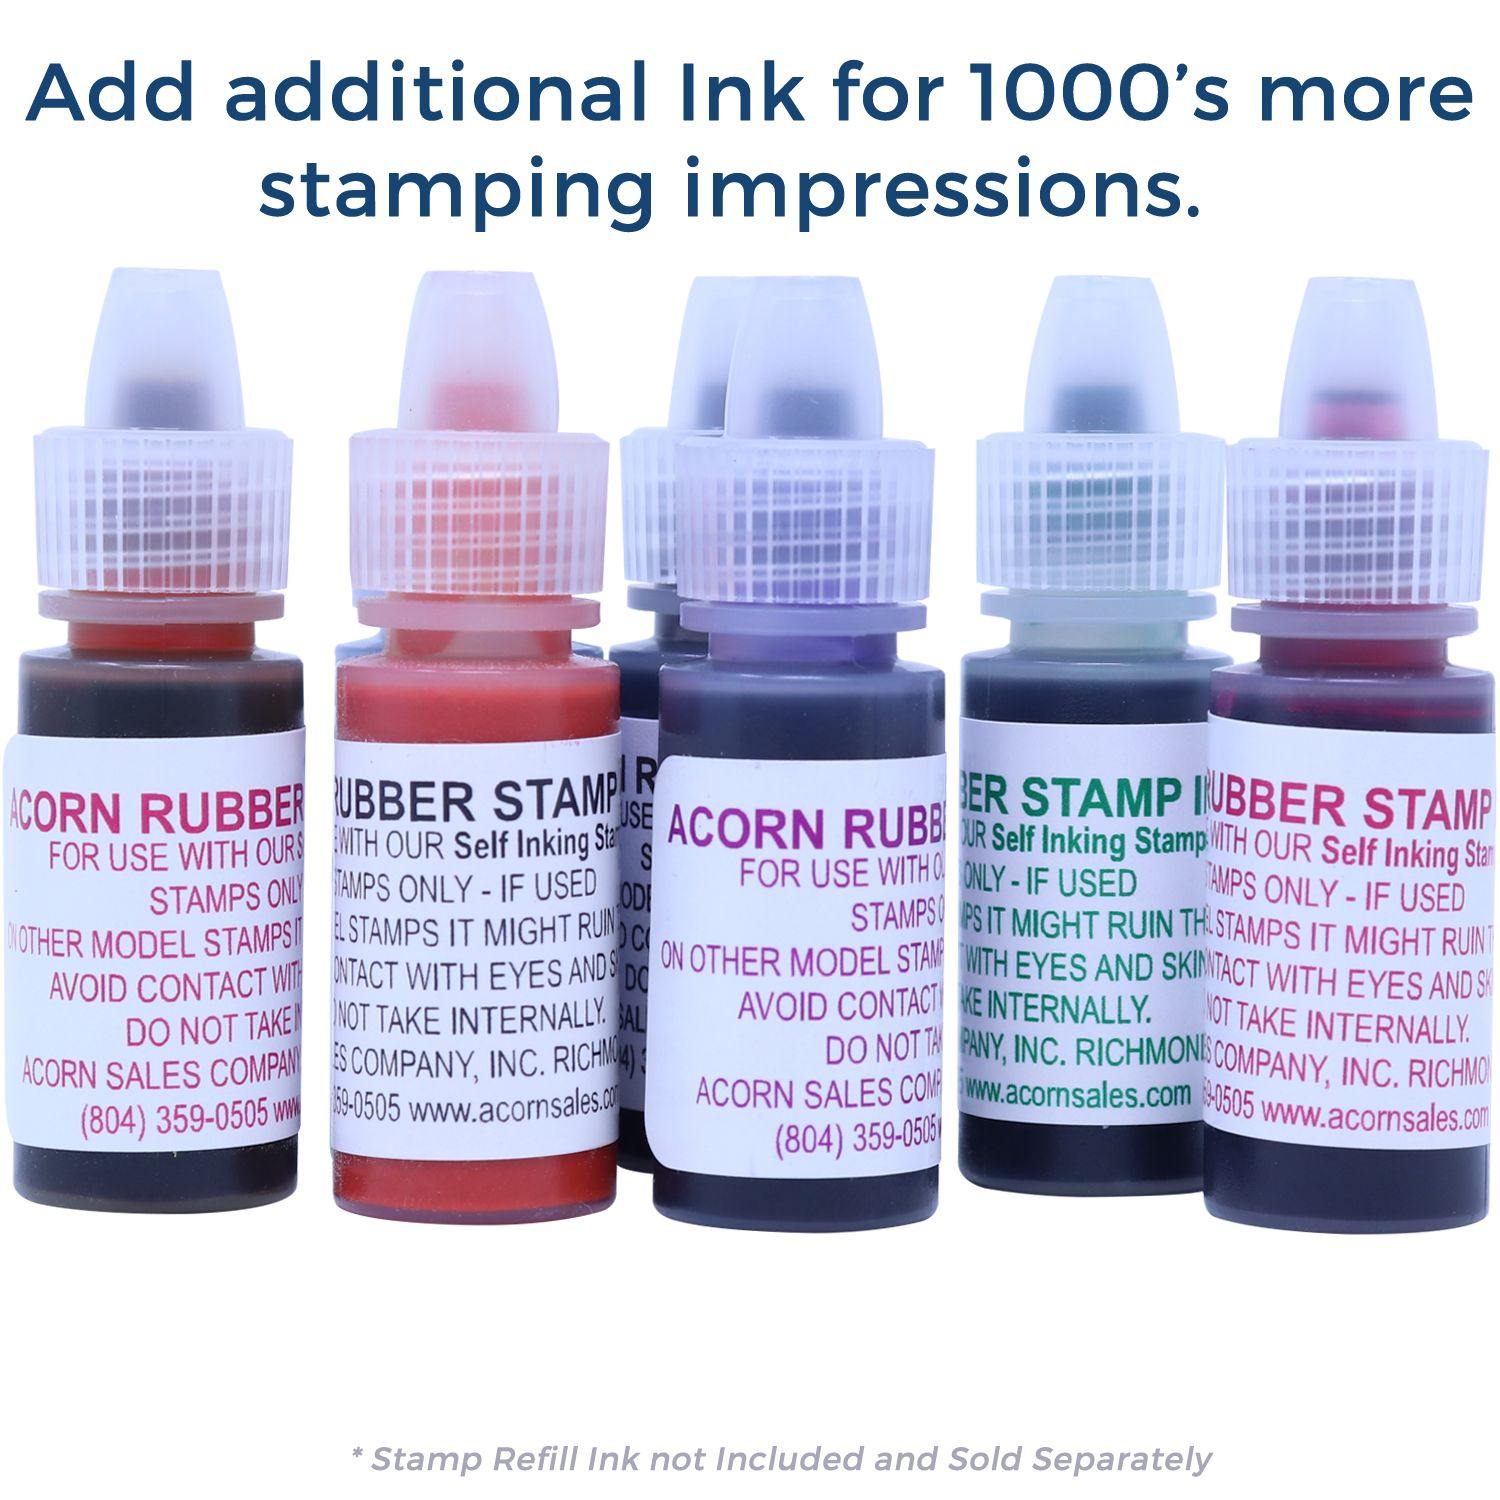 Refill Inks for Large Pre-Inked Judge's Copy Stamp Available